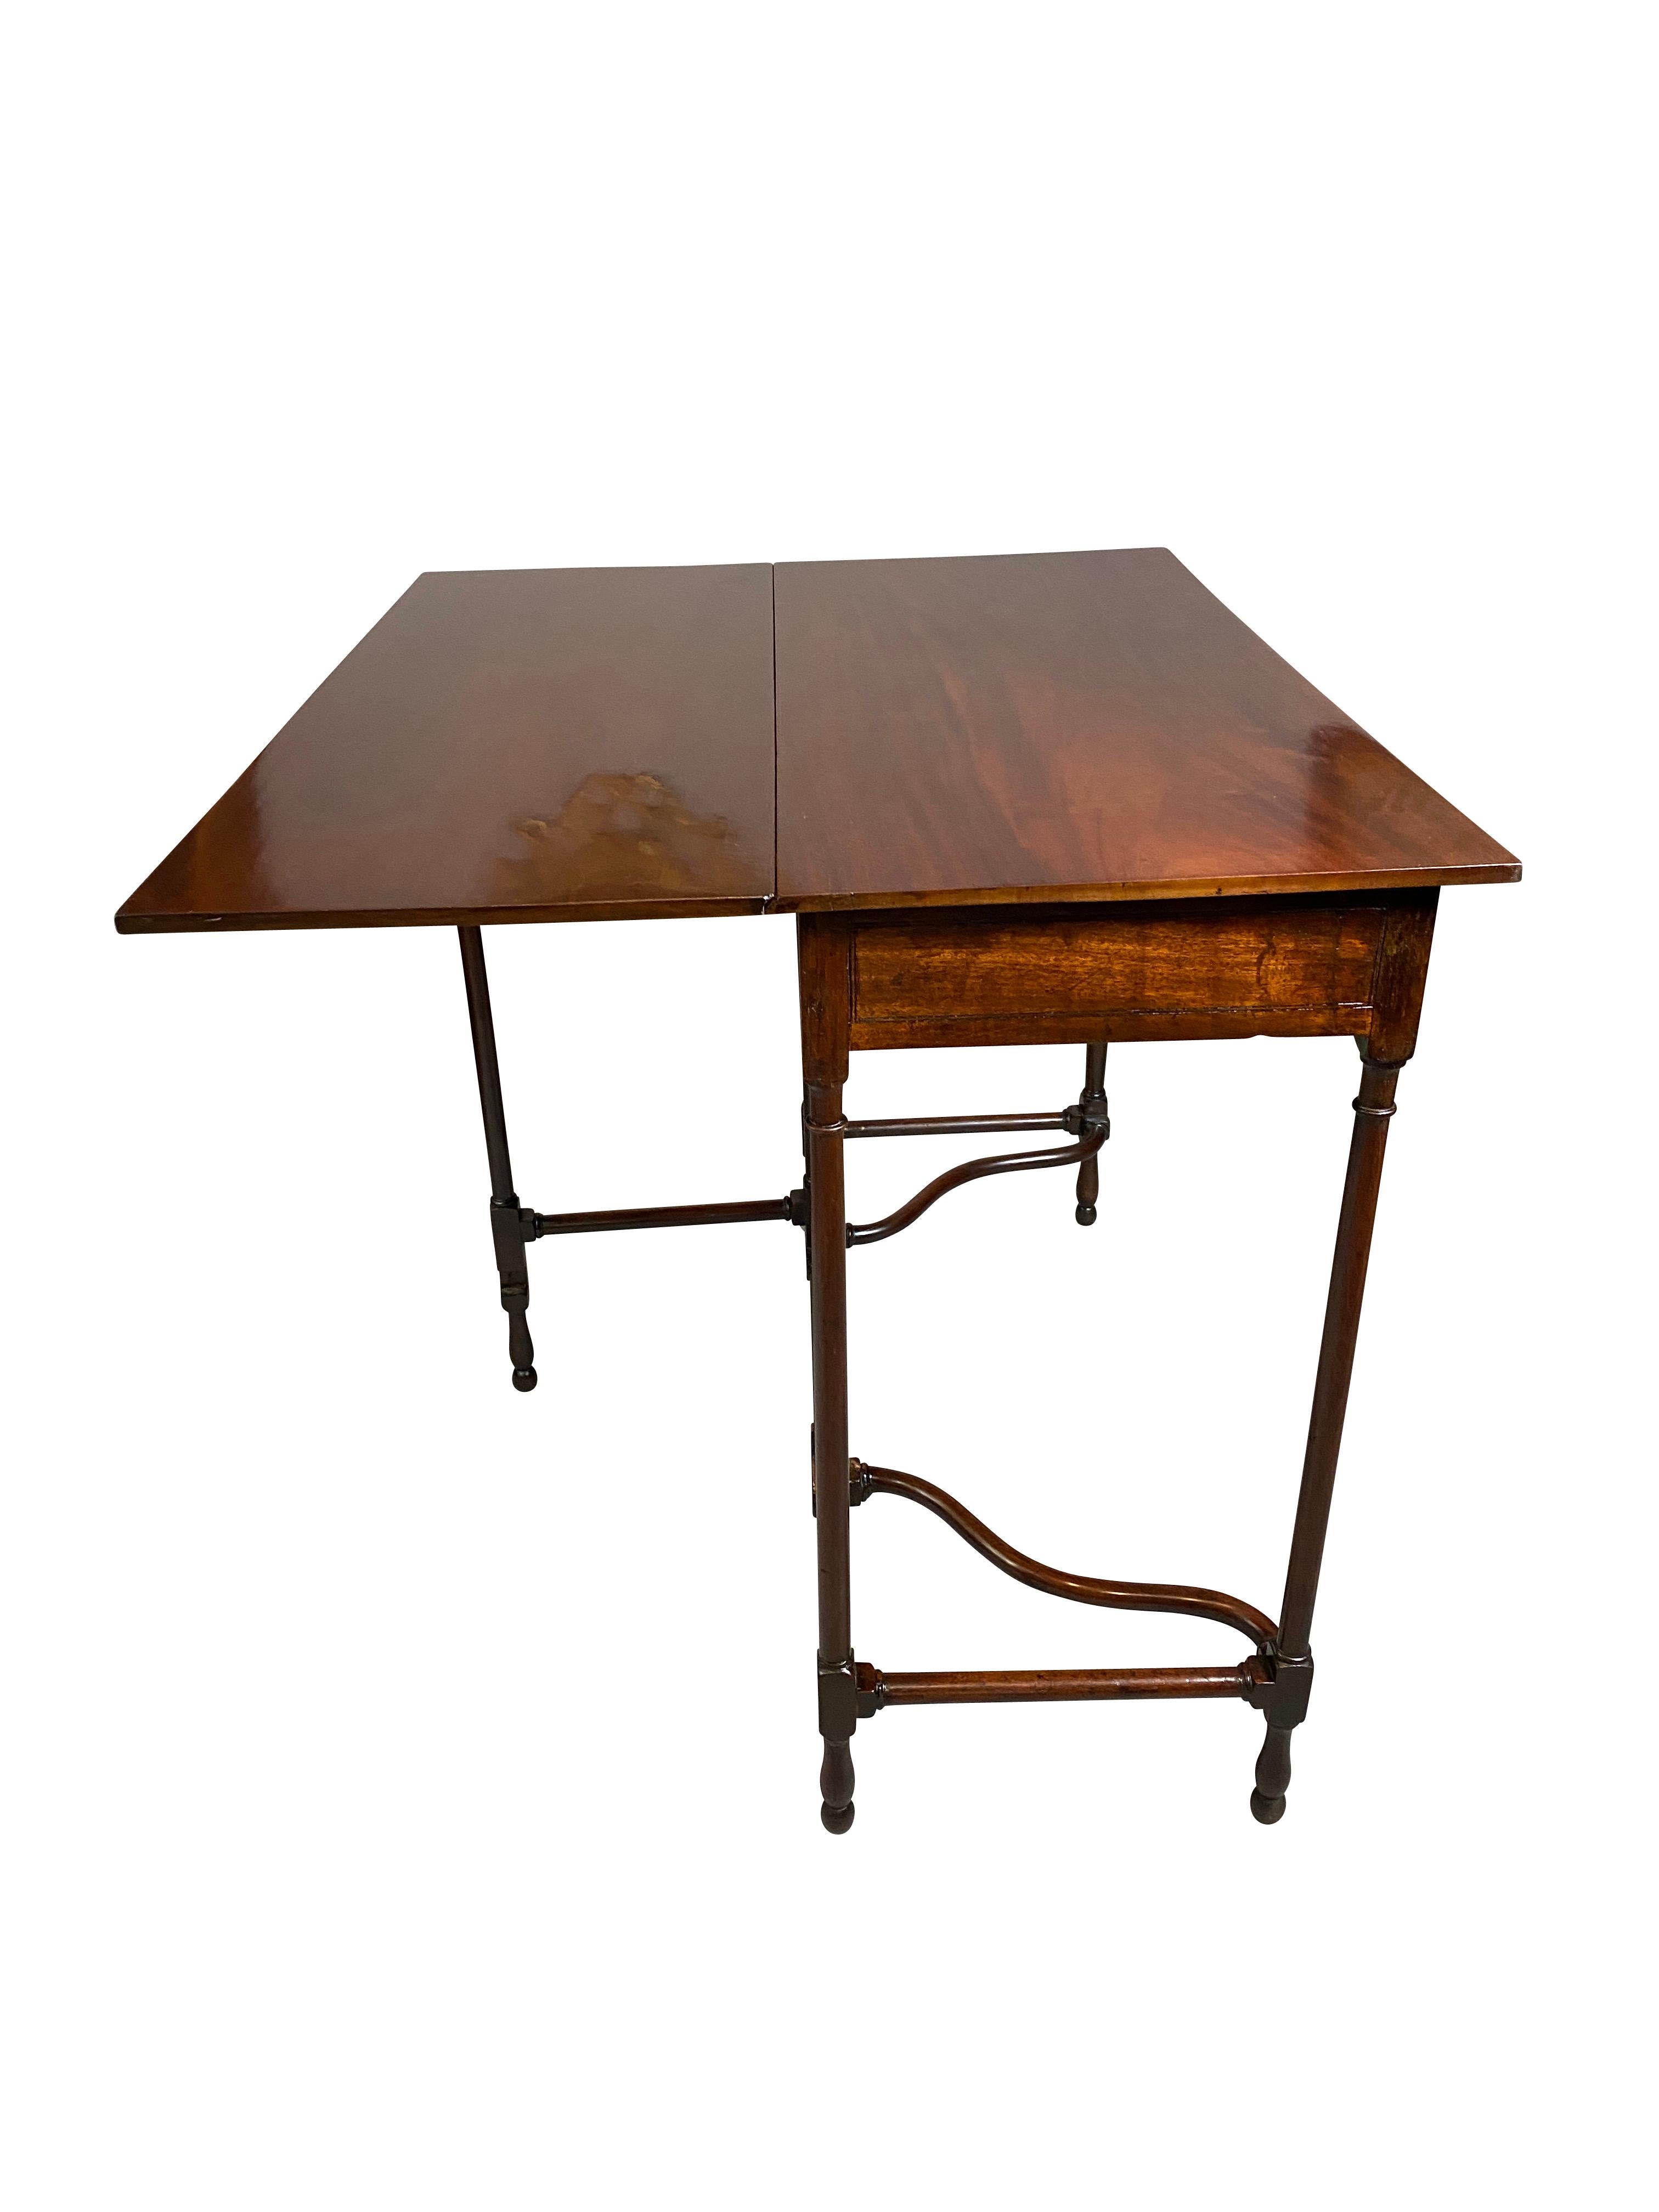 Fine George III Mahogany Spider Leg Table In Good Condition For Sale In Essex, MA